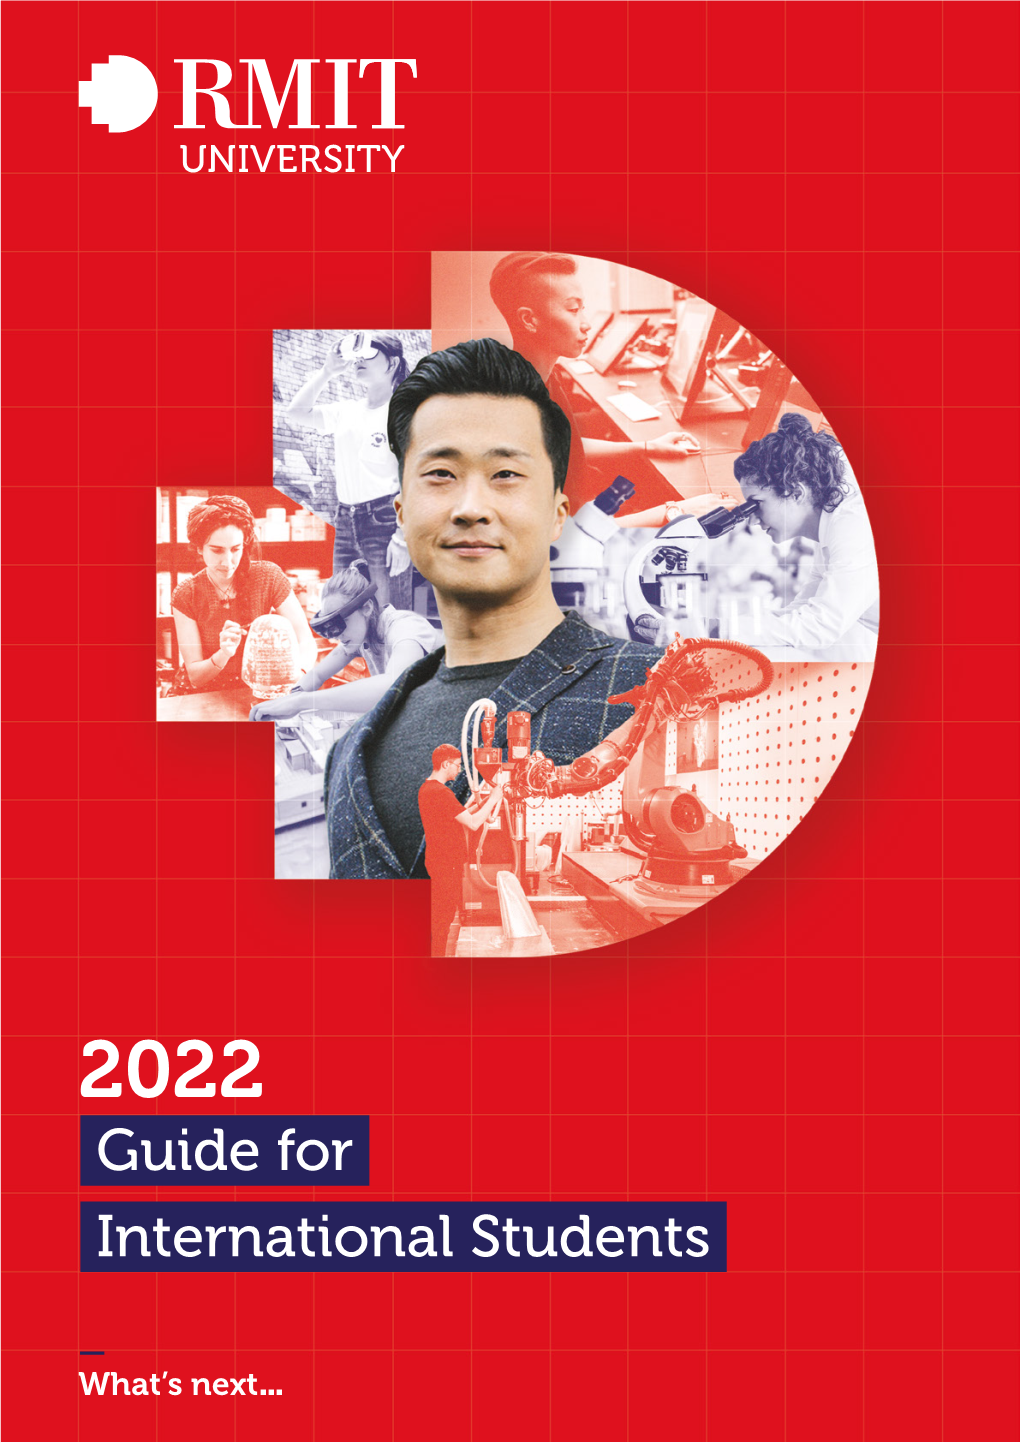 2022 Guide for International Students Contents